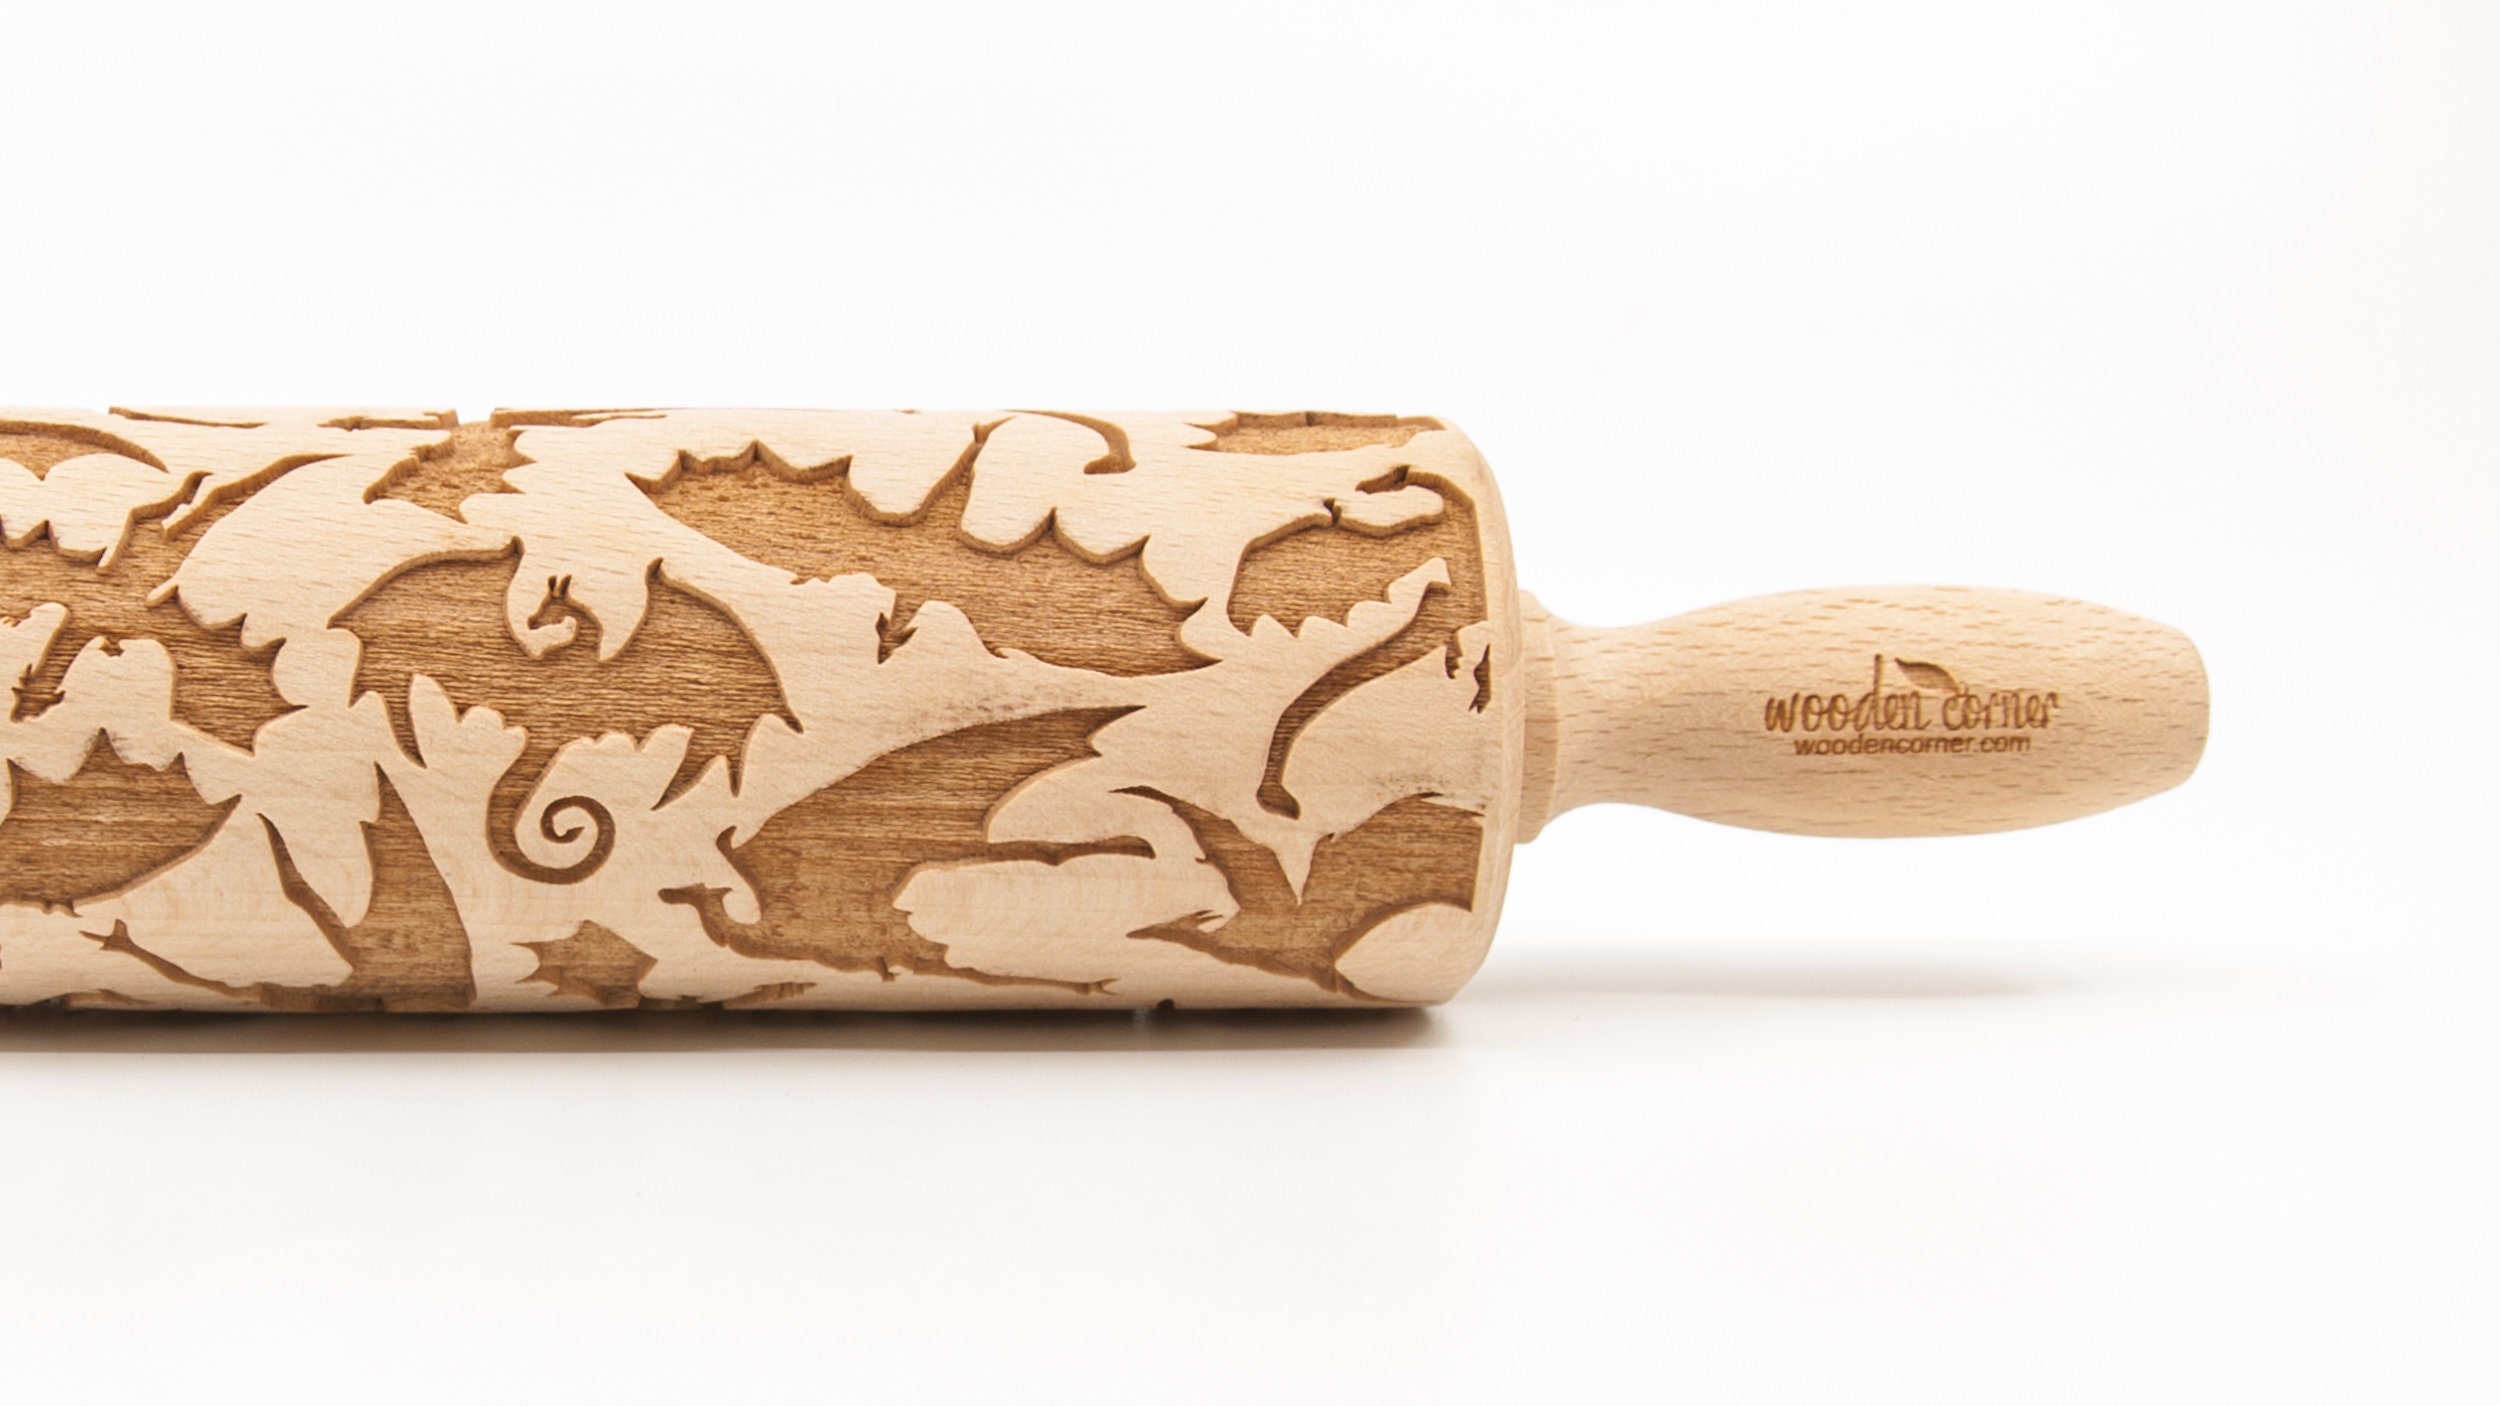 Wooden Playdough Tools Playdough and Sand Roller Wooden Rolling Pin Wooden  Stamps 